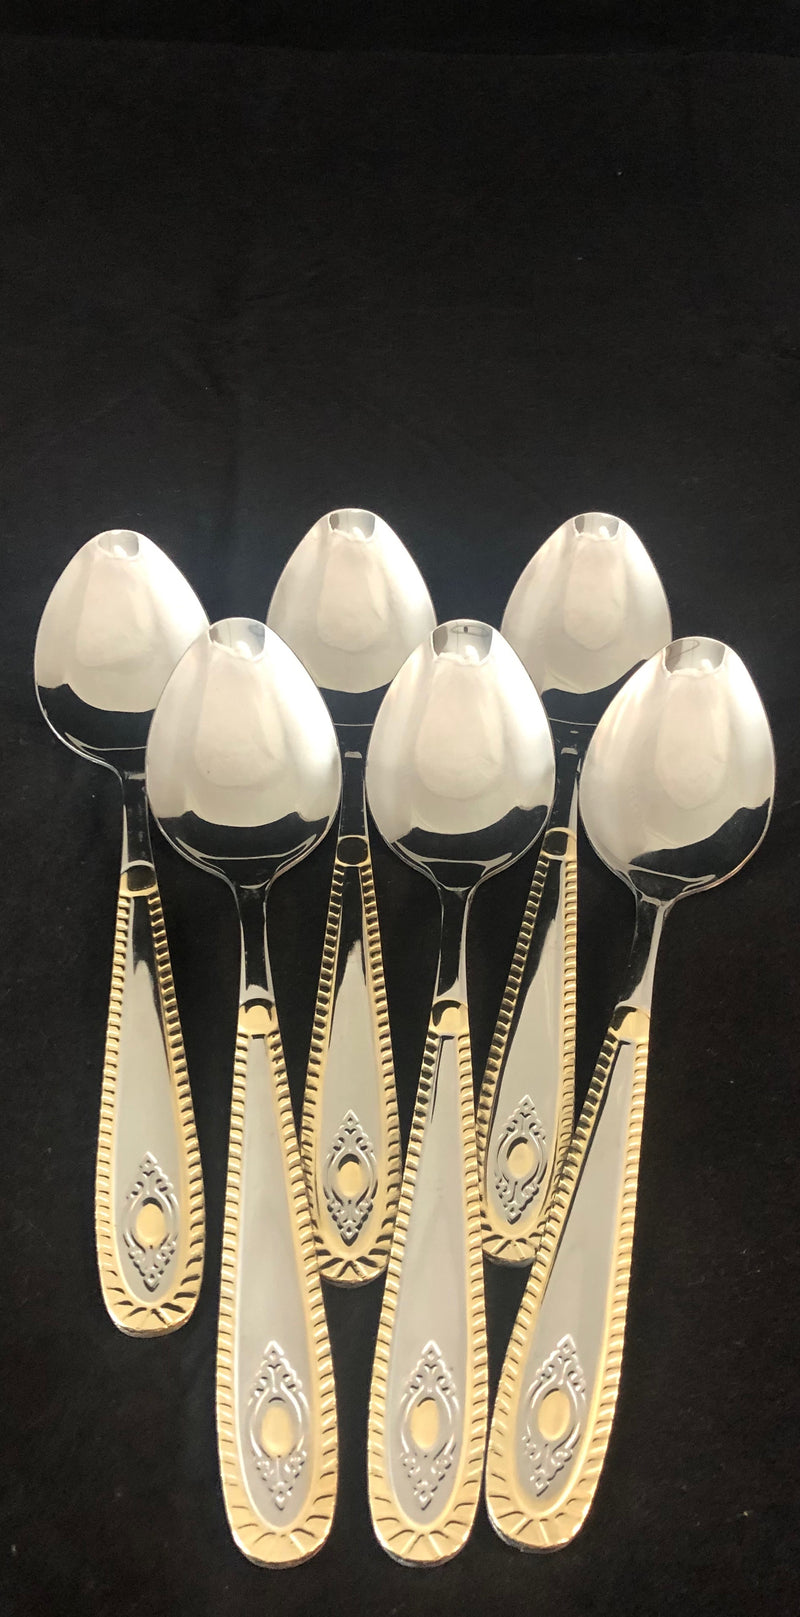 7943*  Copper Plated Dinner Spoon 6pc Set